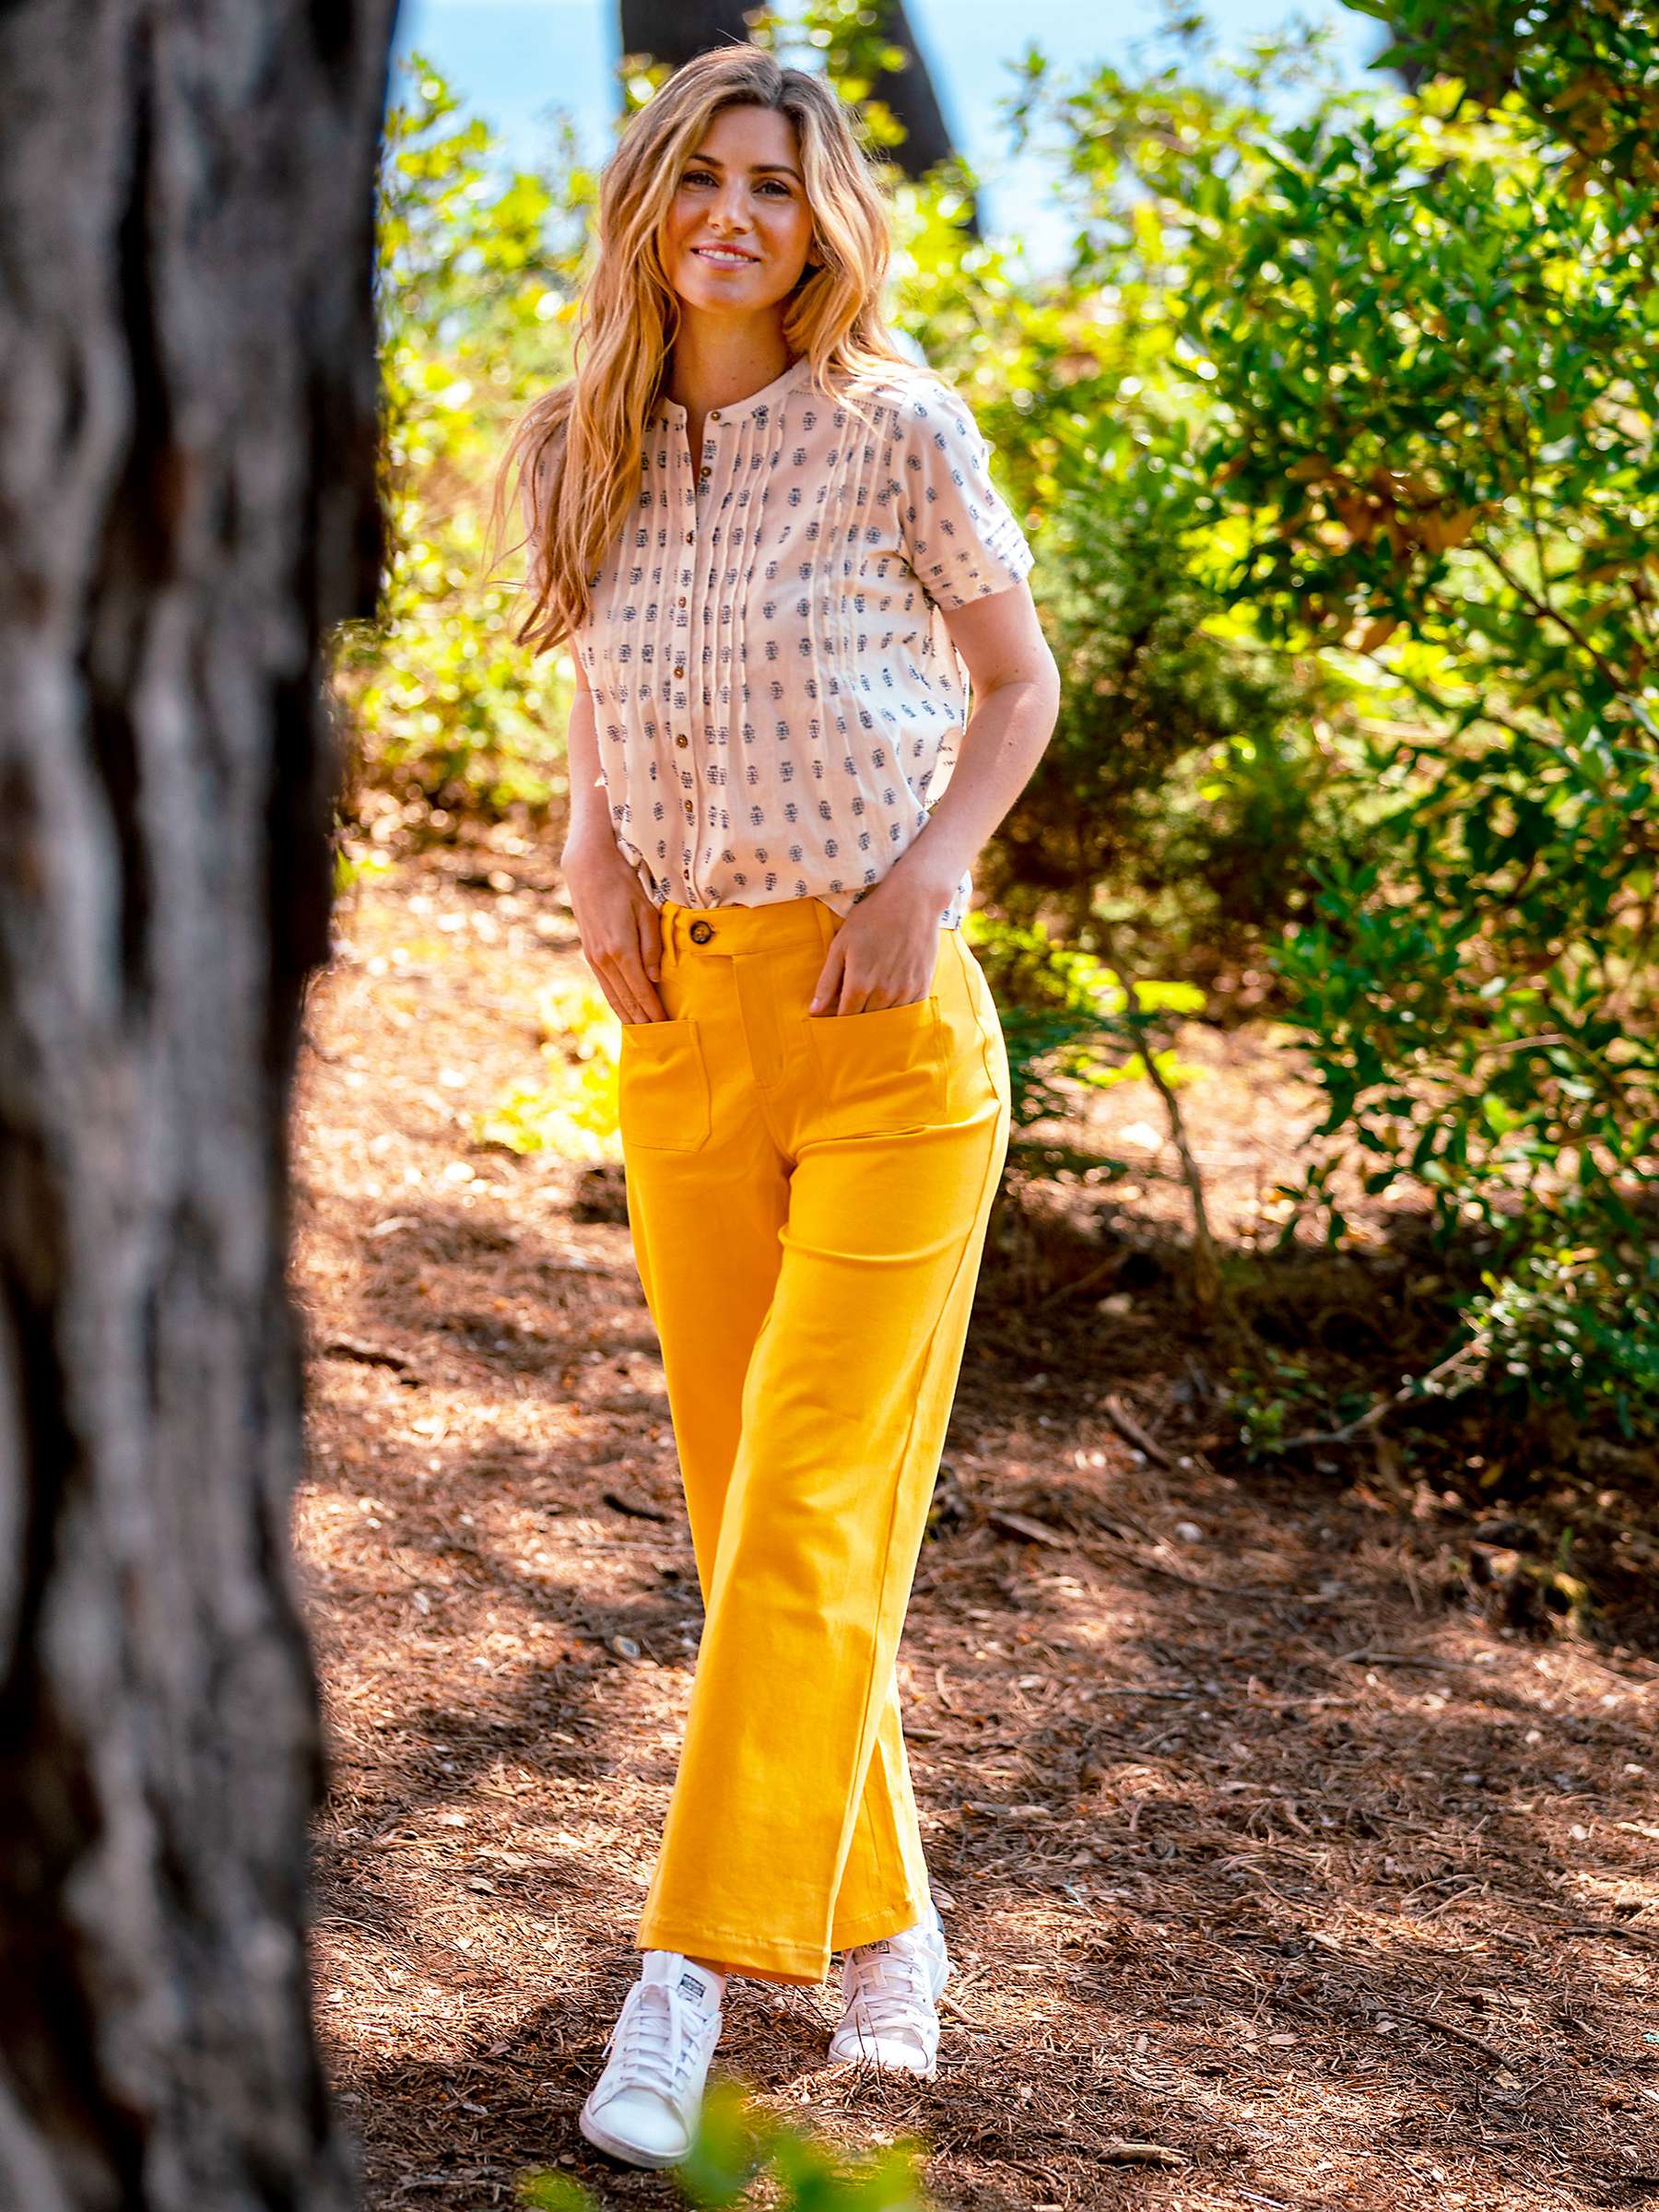 Buy Brakeburn Patch Pocket Trousers, Yellow Online at johnlewis.com